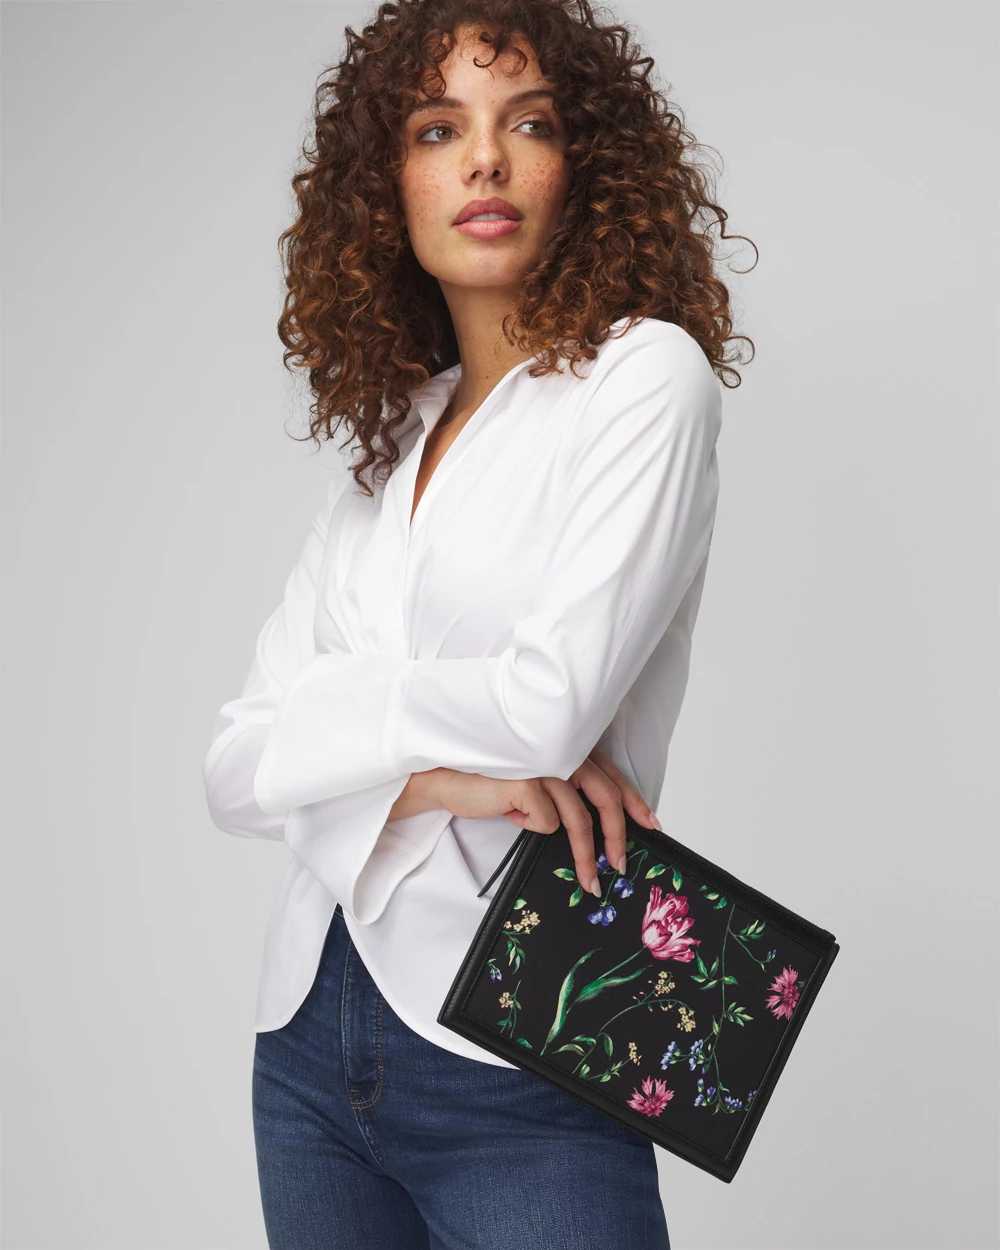 Floral Clutch click to view larger image.